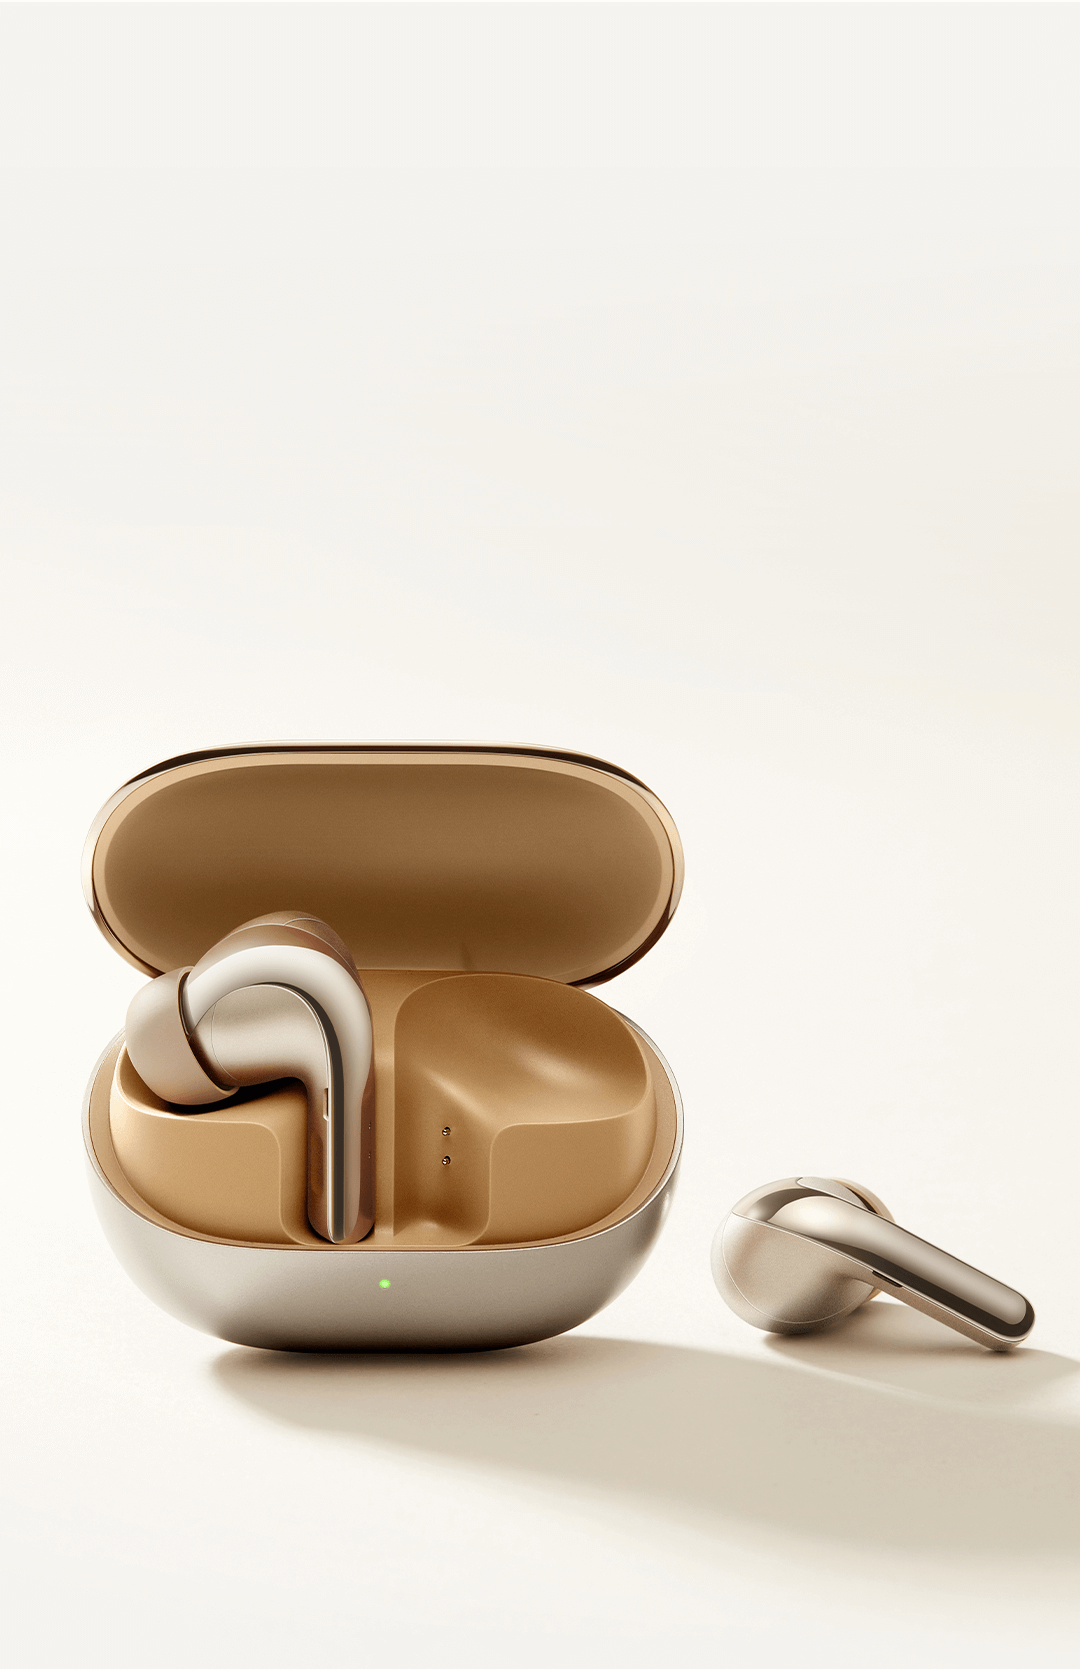 Xiaomi Buds 4 Pro with powerful noise cancellation, 38 hours of battery  life launched - Gizmochina